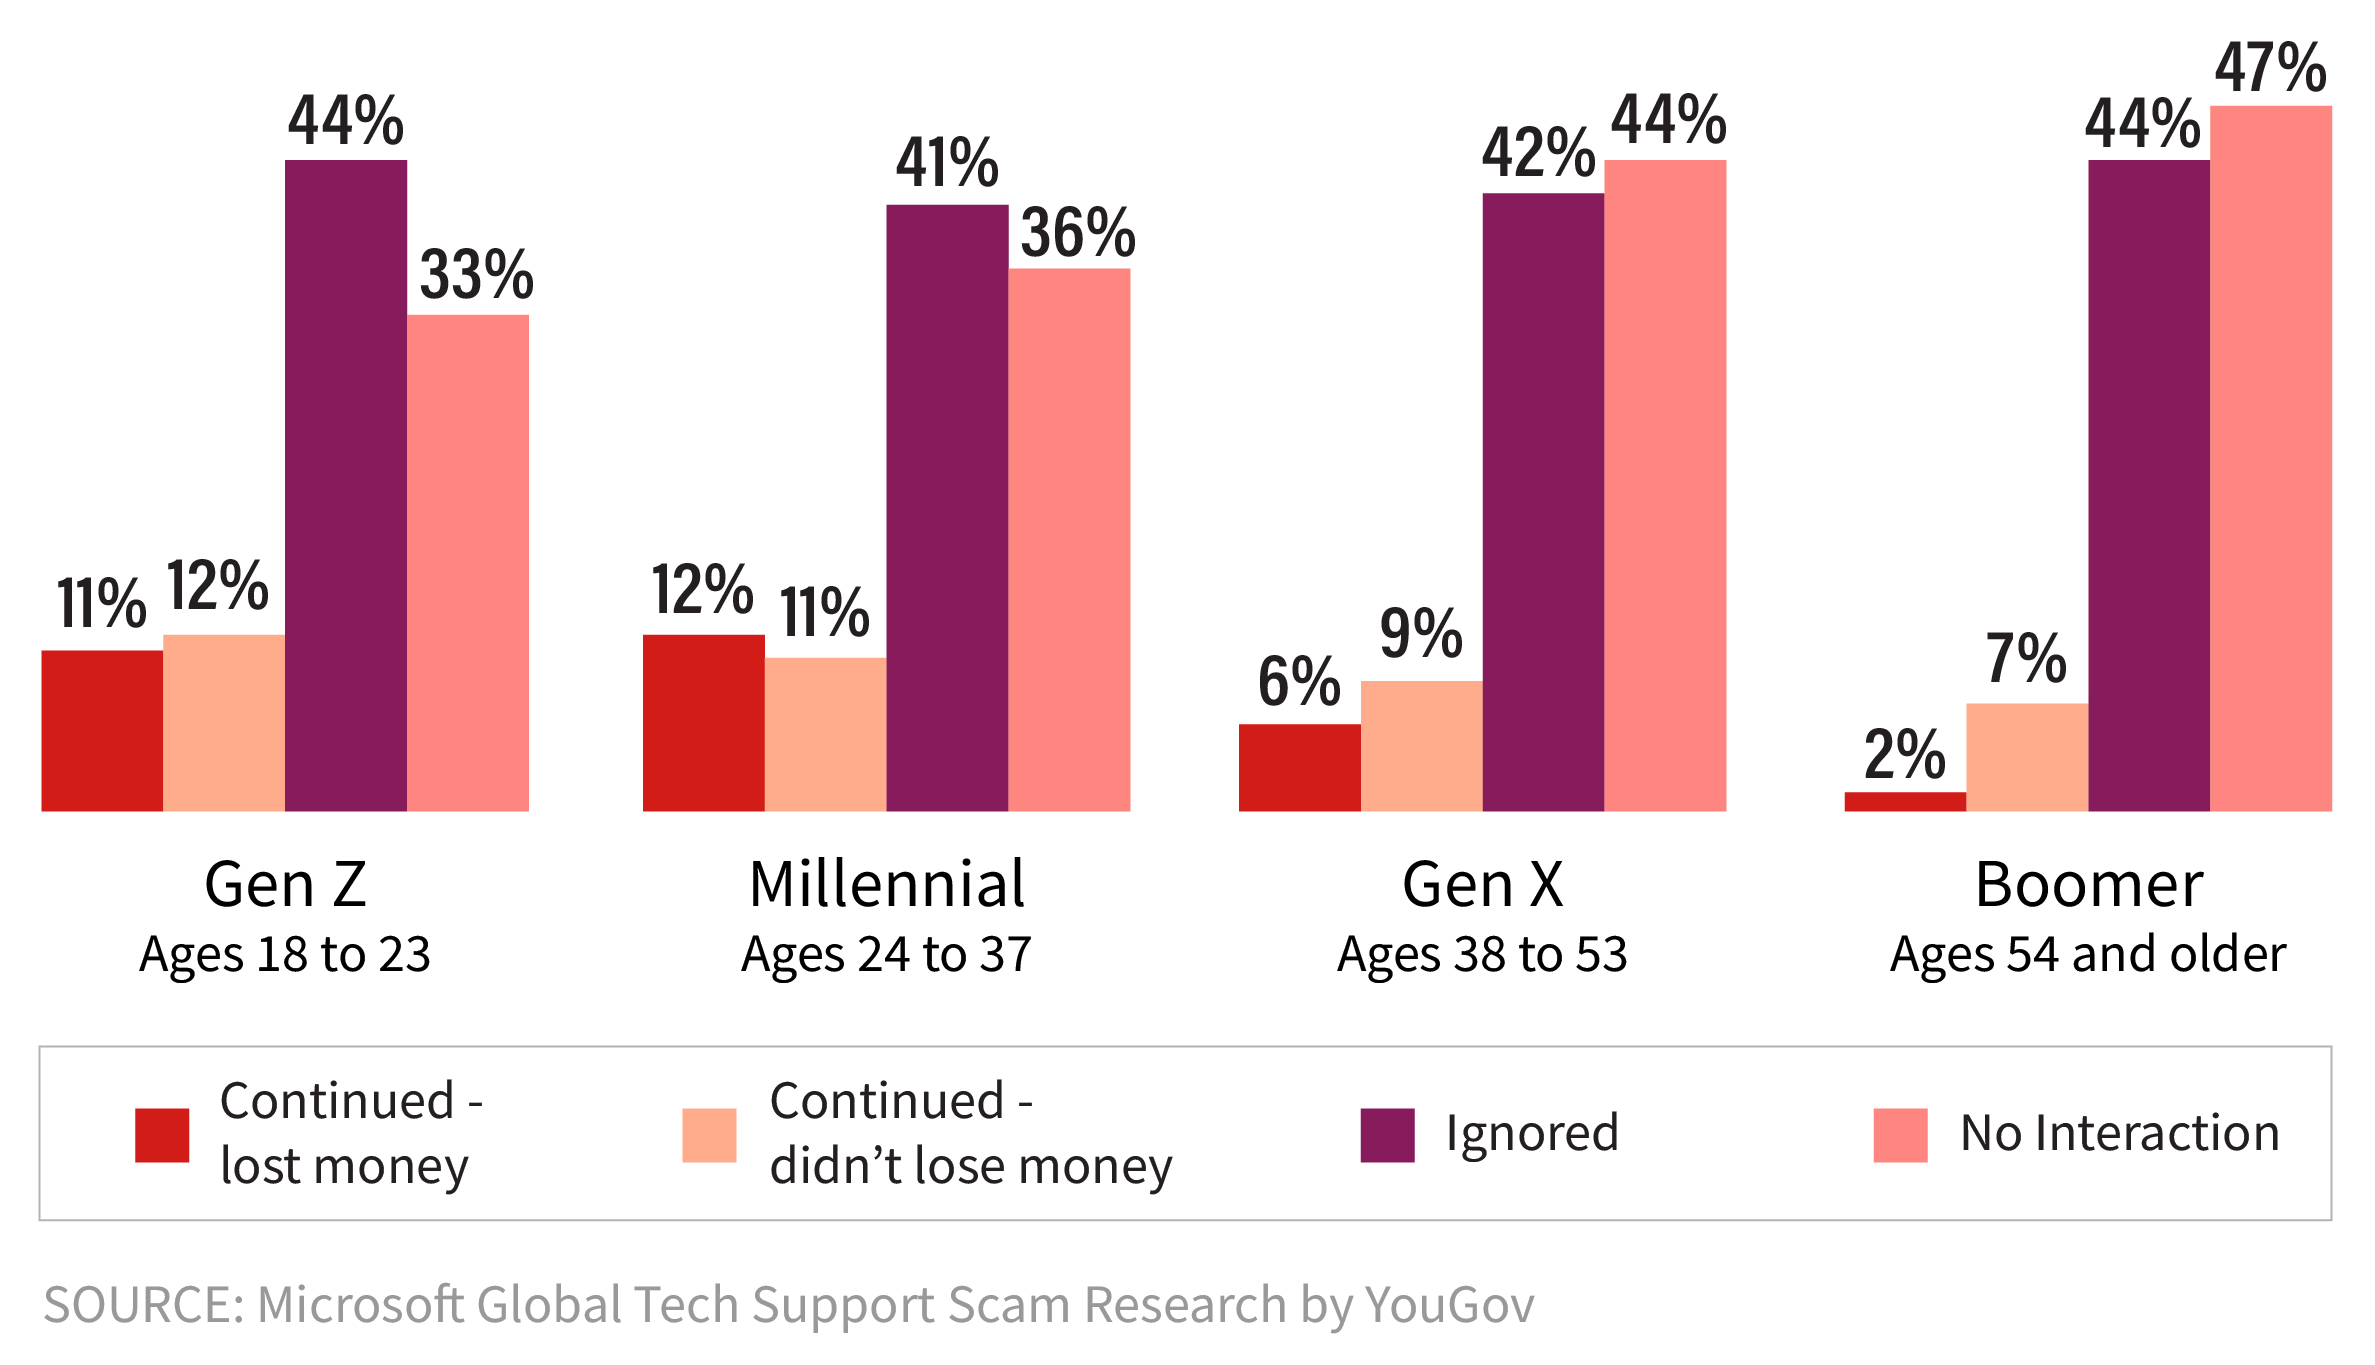 boomers have a two percent chance of losing money on tech support scams versus millennials who have a twelve percent chance to lose money on a tech support scam